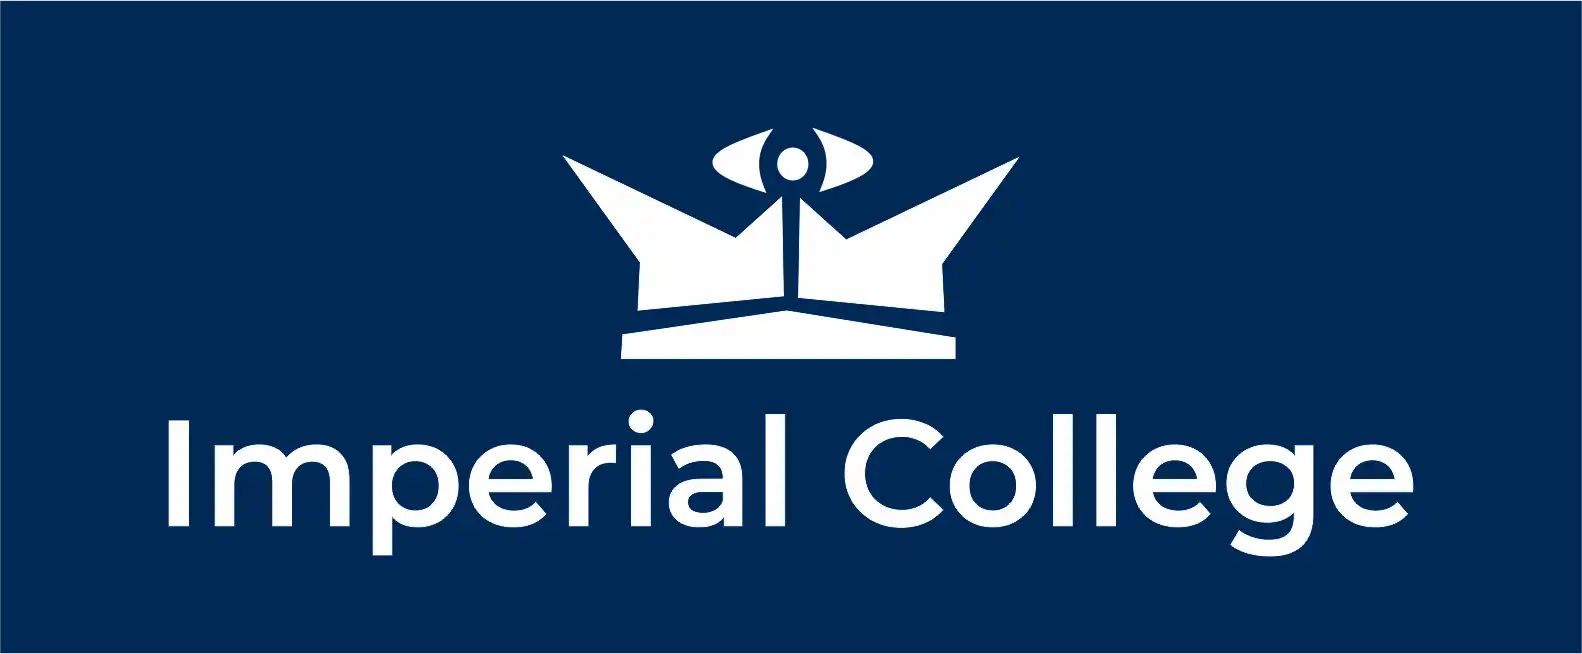 College imperial About Us